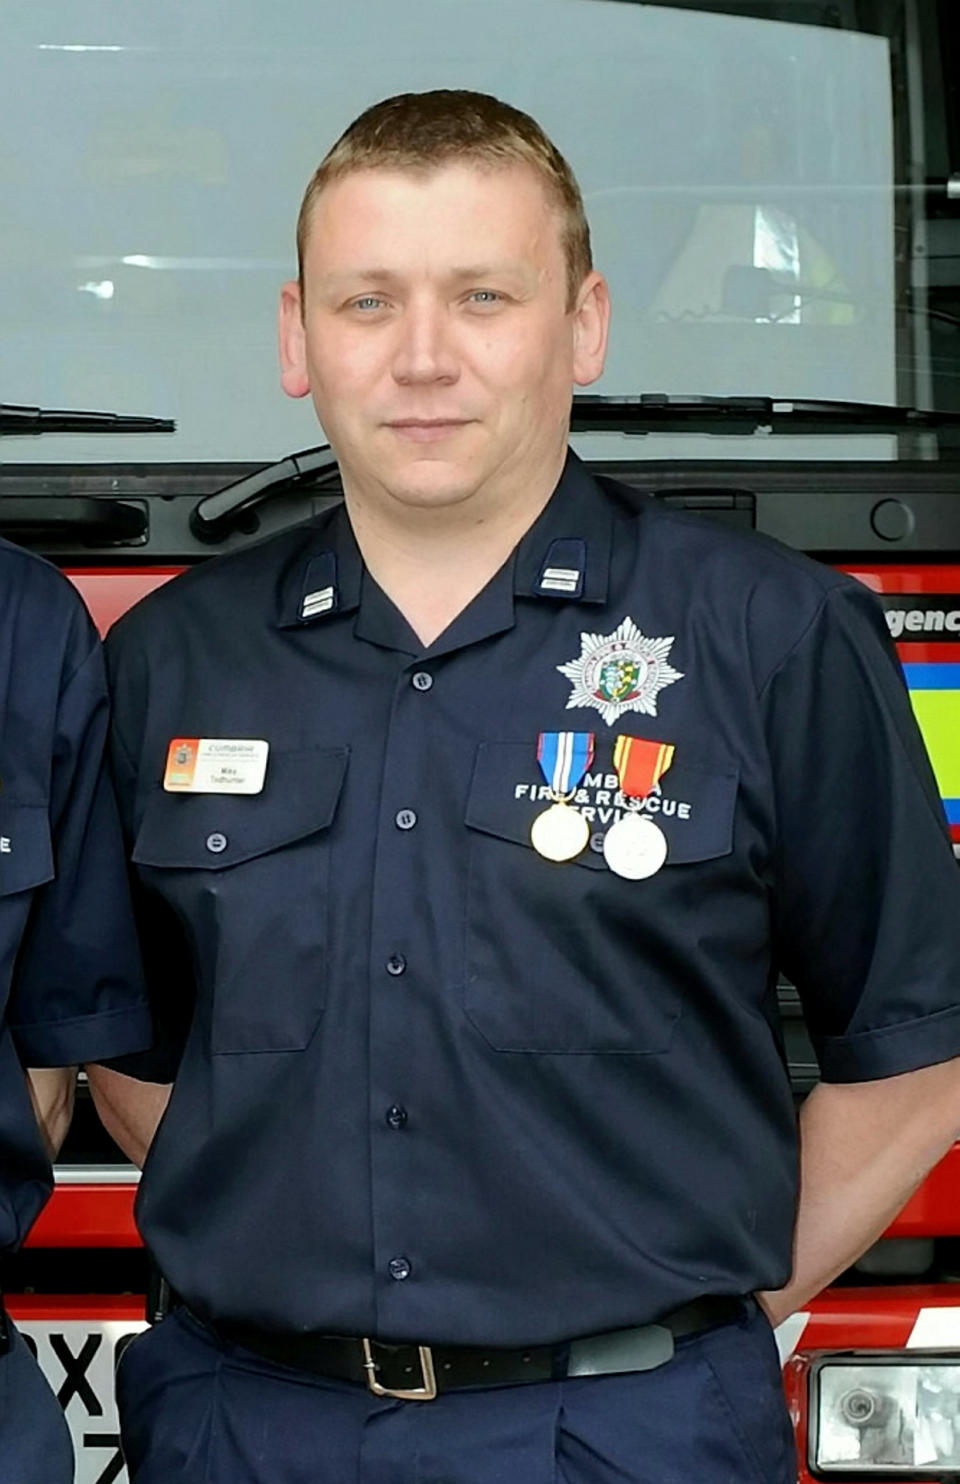 Todhunter, 50, had served with Cumbria Fire and Rescue Service for more than 30 years. (SWNS)